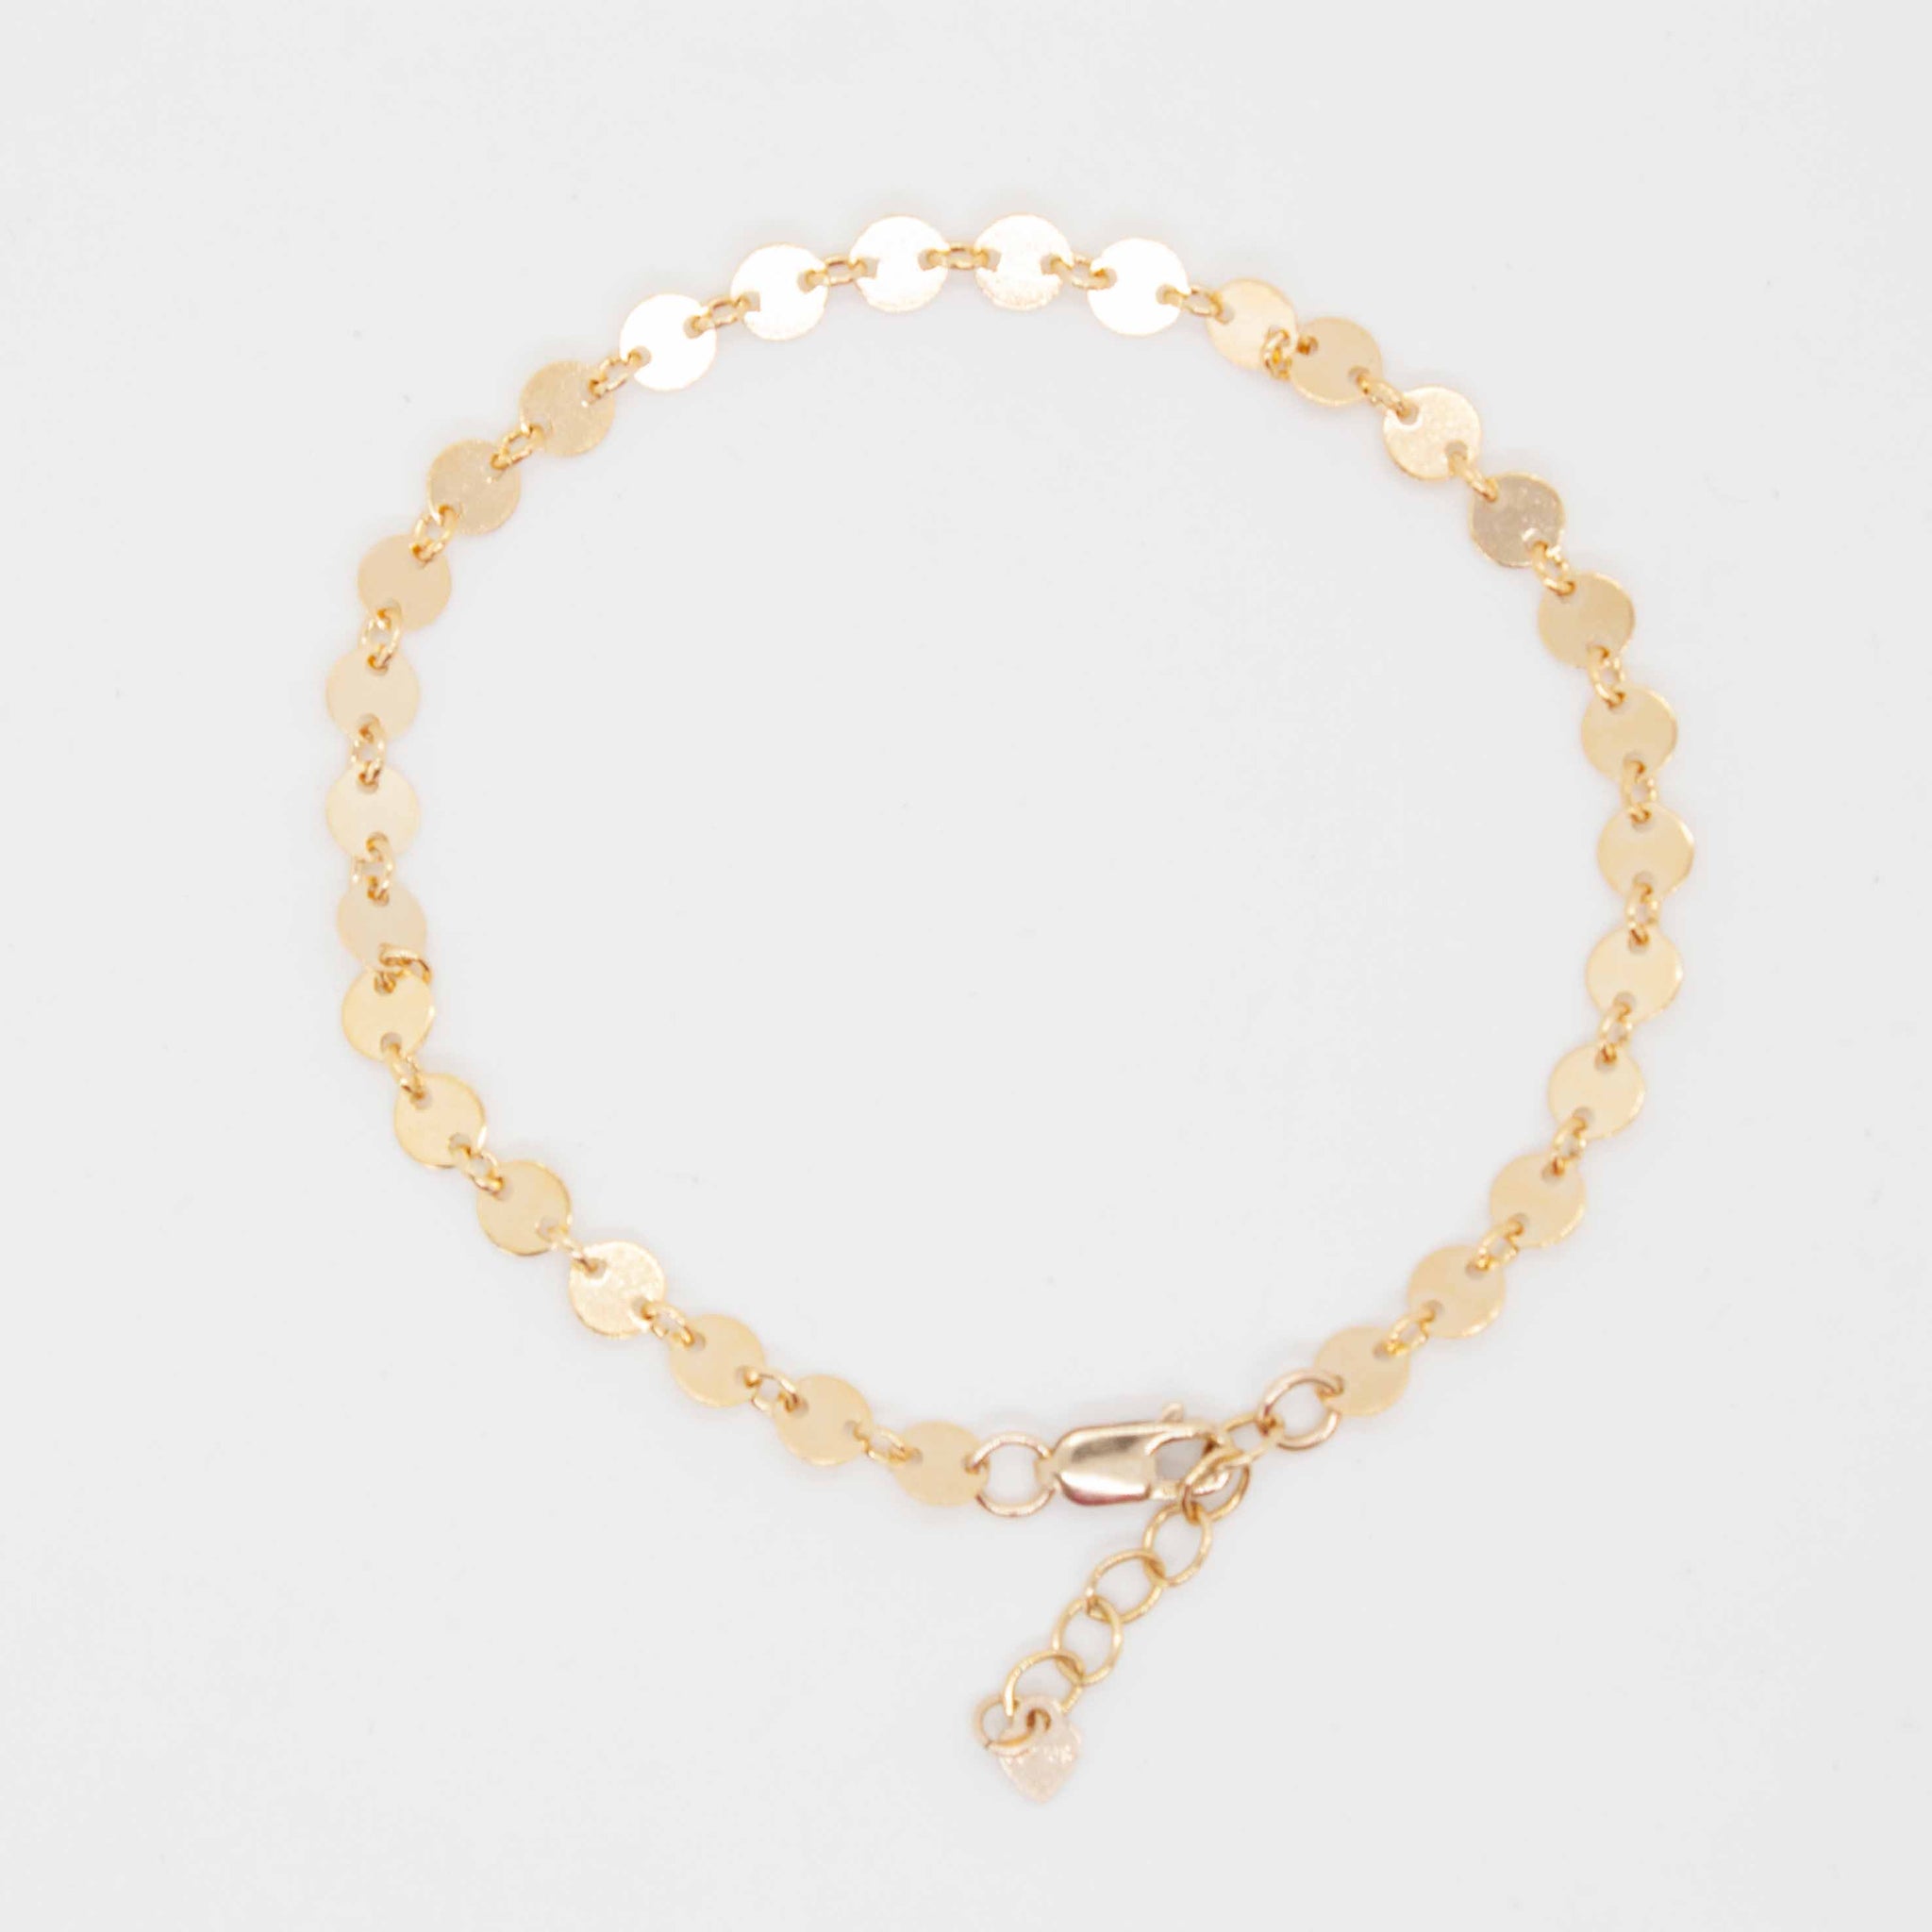 For LOVE of simplicity and classic elegance. 7 inch (adjustable) 14 karat gold filled* coin link chain *gold-filled jewelry is composed of a solid layer of gold, mechanically bonded to sterling silver. you are fine to shower in it, get it wet, wear it for life! Made in Toronto by kp jewelry co.